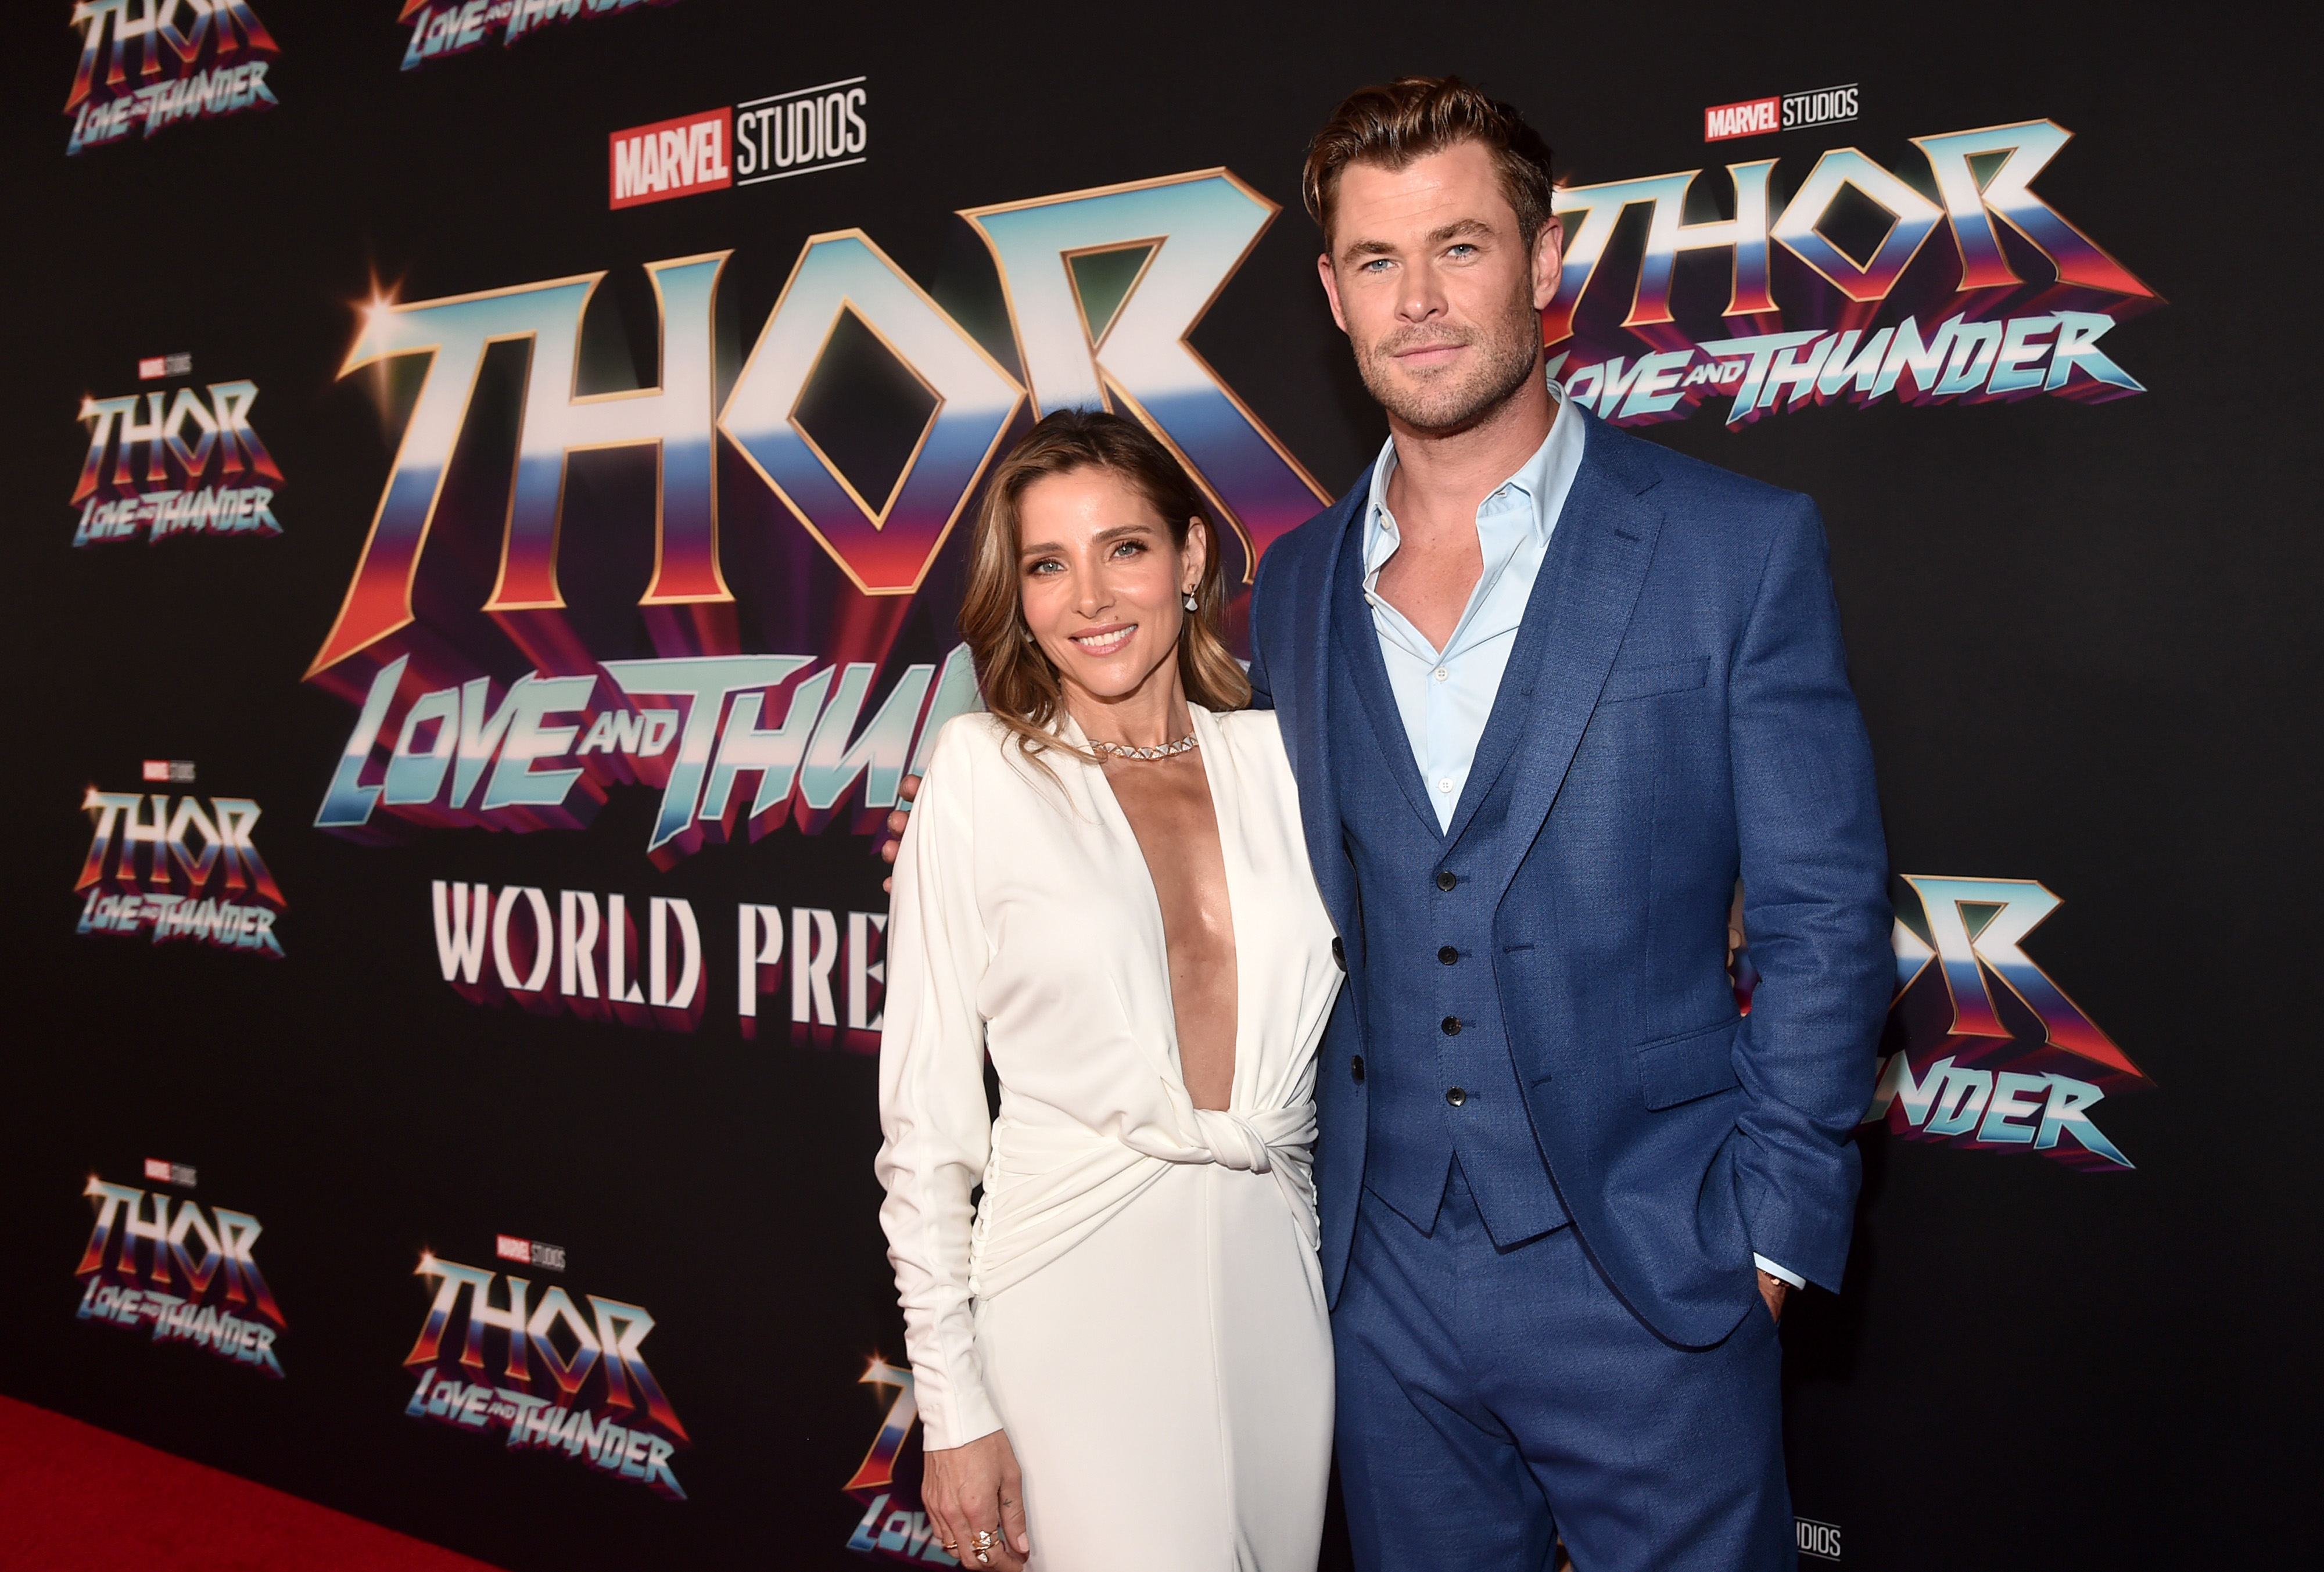 Chris Hemsworth and Elsa Pataky attend the Thor Love and Thunder